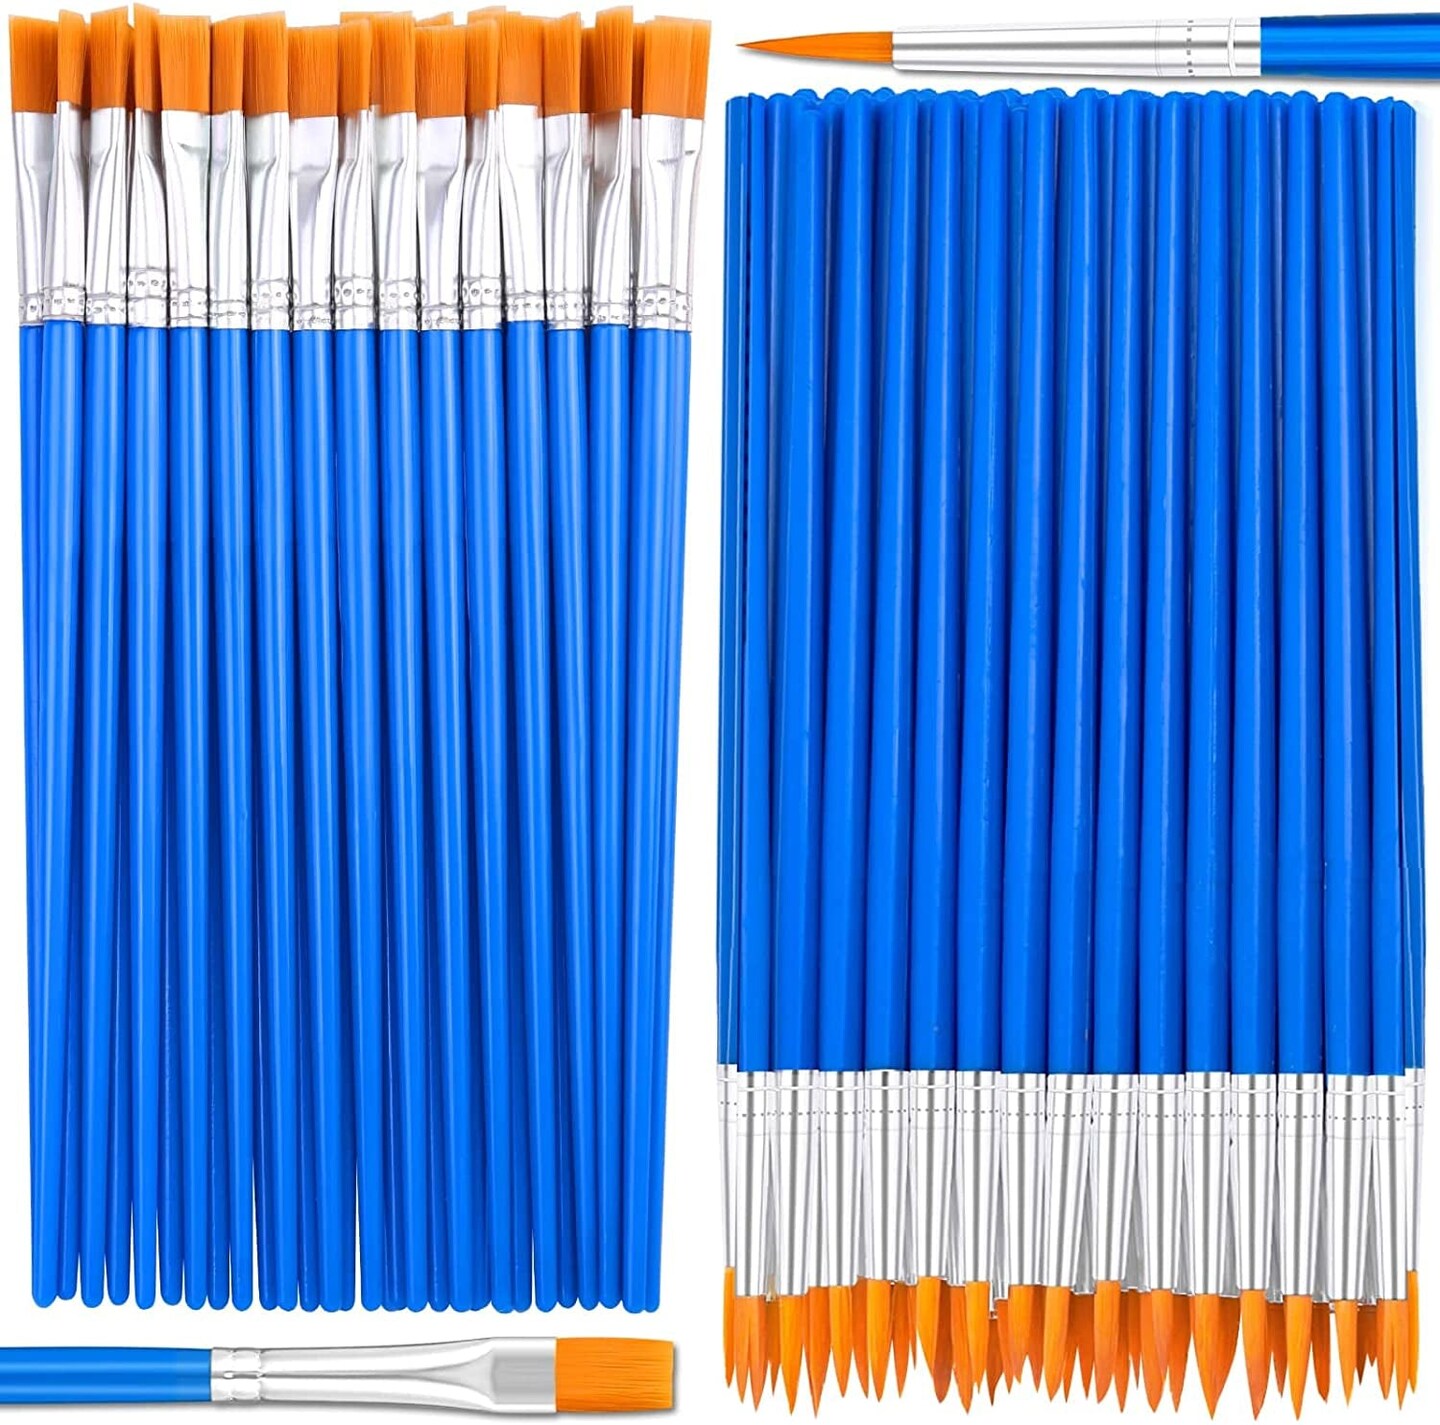 50 Pcs Flat Paint Brushes for Touch Up,  Small Paint Brushes for Classroom Crafts Paint Brushes for Acrylic Painting Watercolor Canvas Face Painting